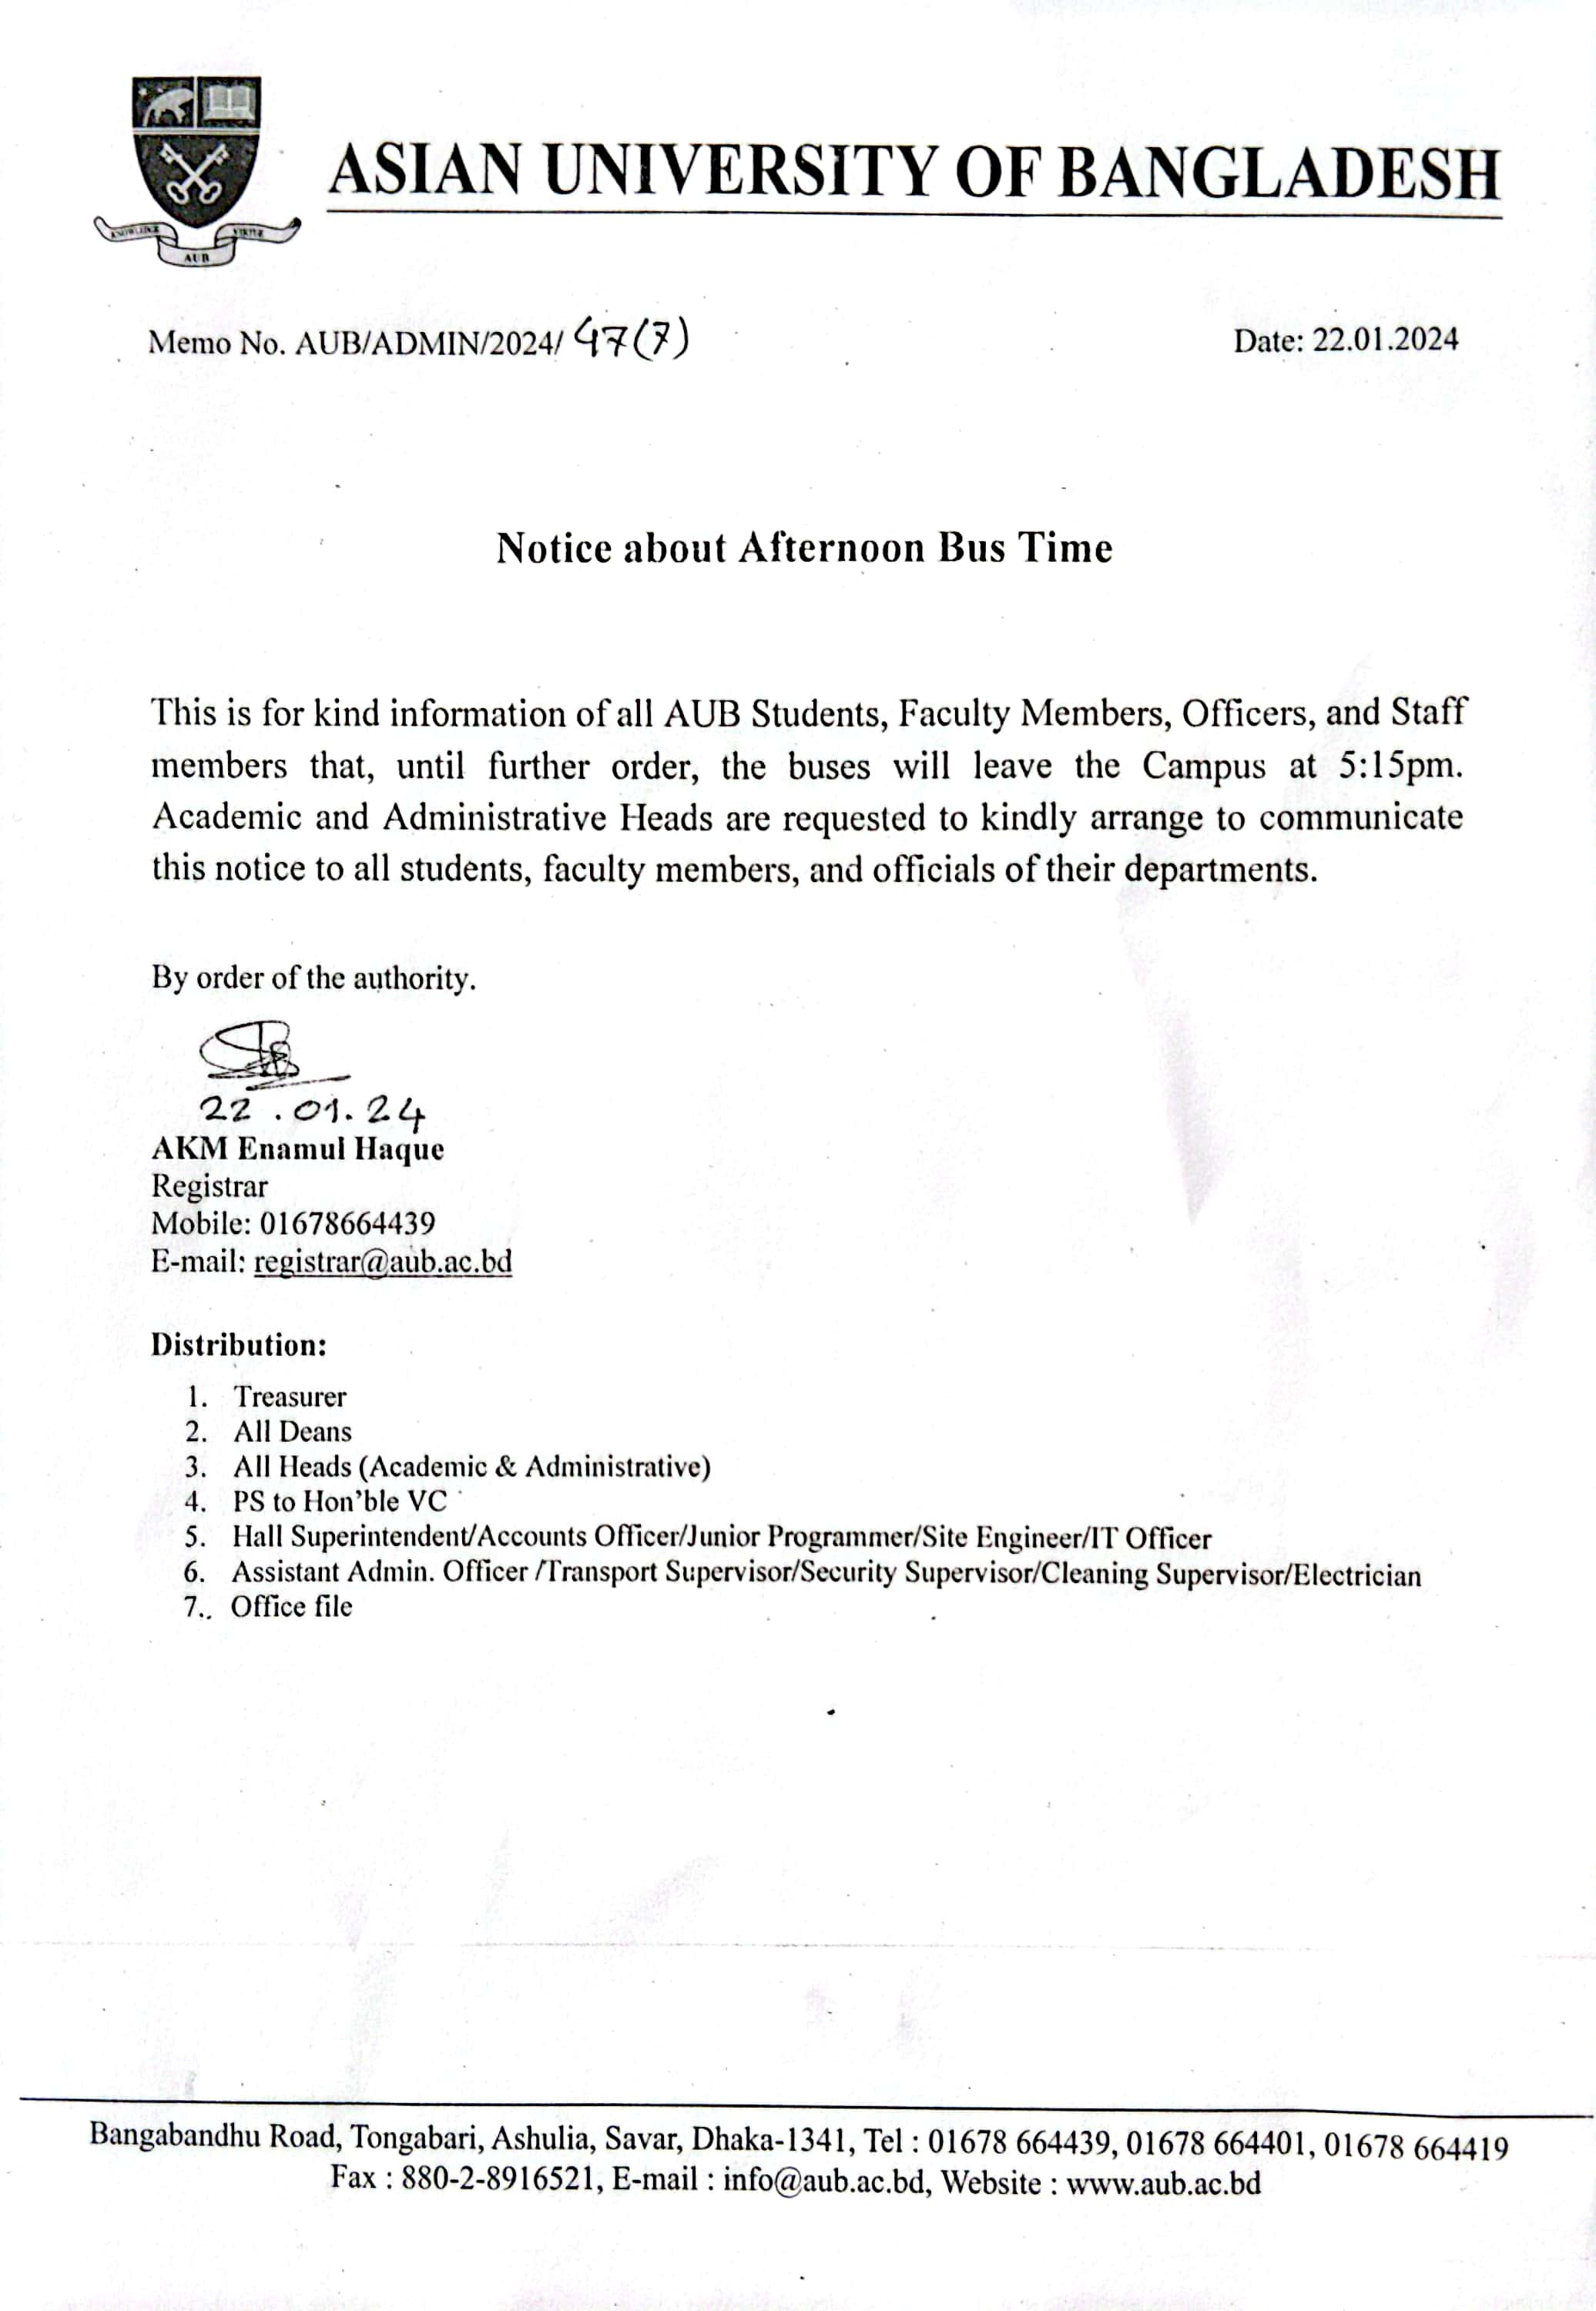 Notice for Afternoon Bus Time